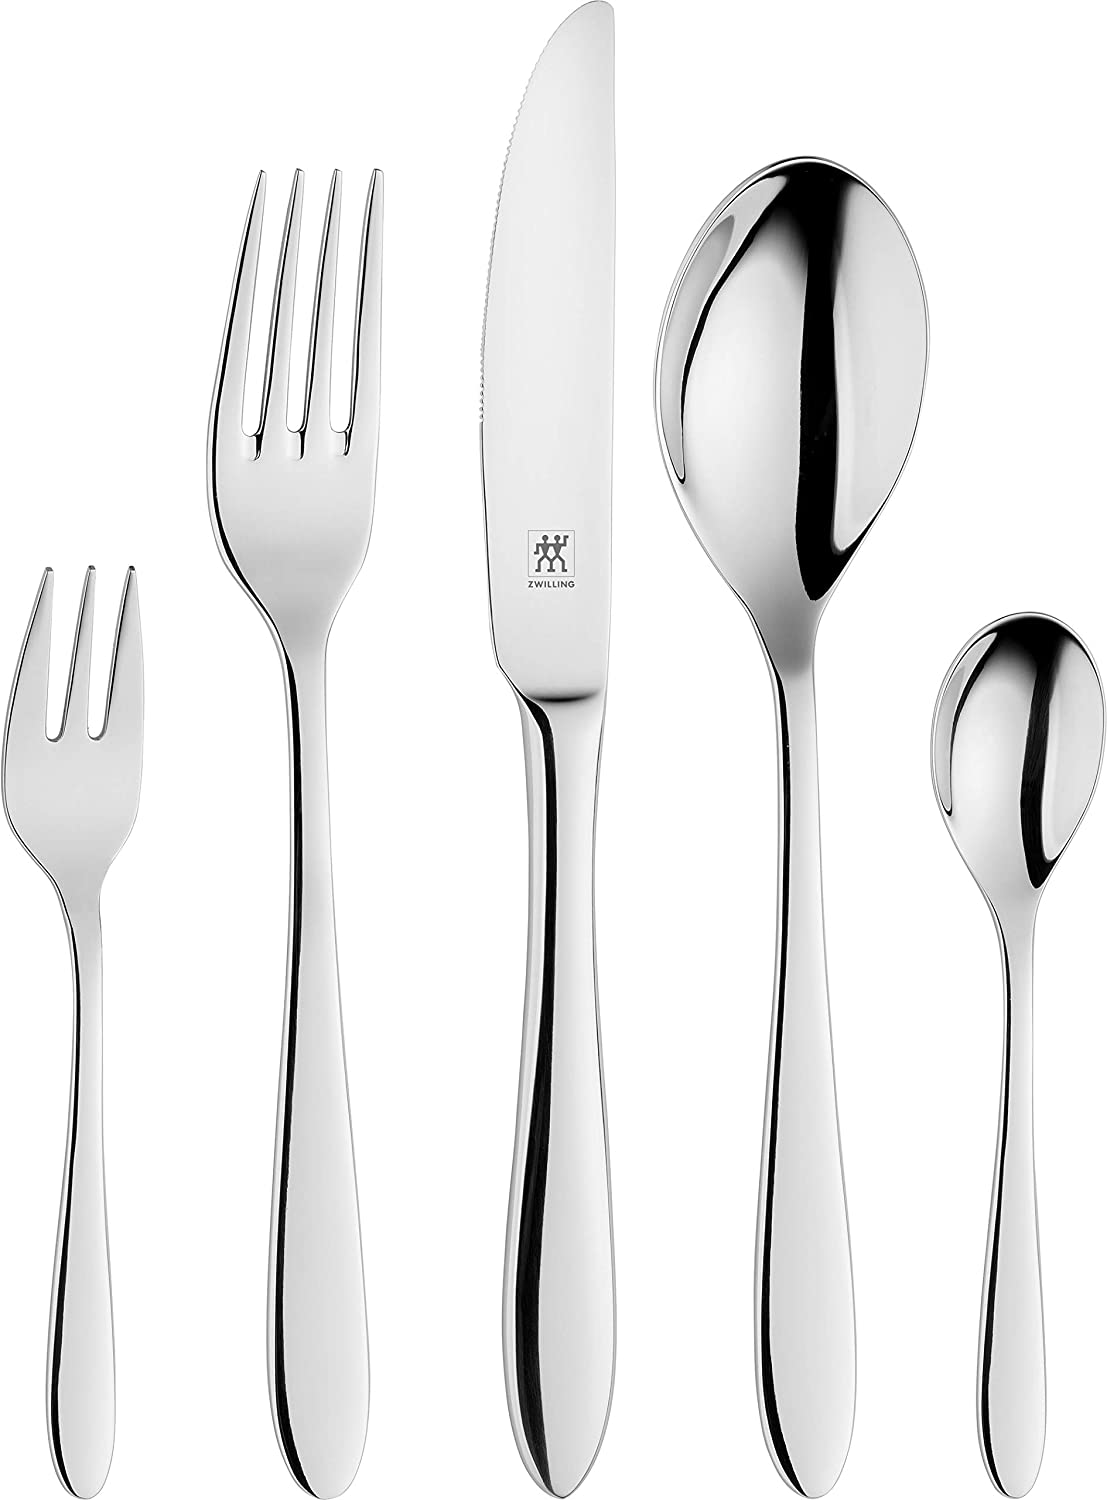 ZWILLING Cutlery Set 60 Pieces for 12 People 18/10 Stainless Steel / High Quality Blade Steel Polished Style